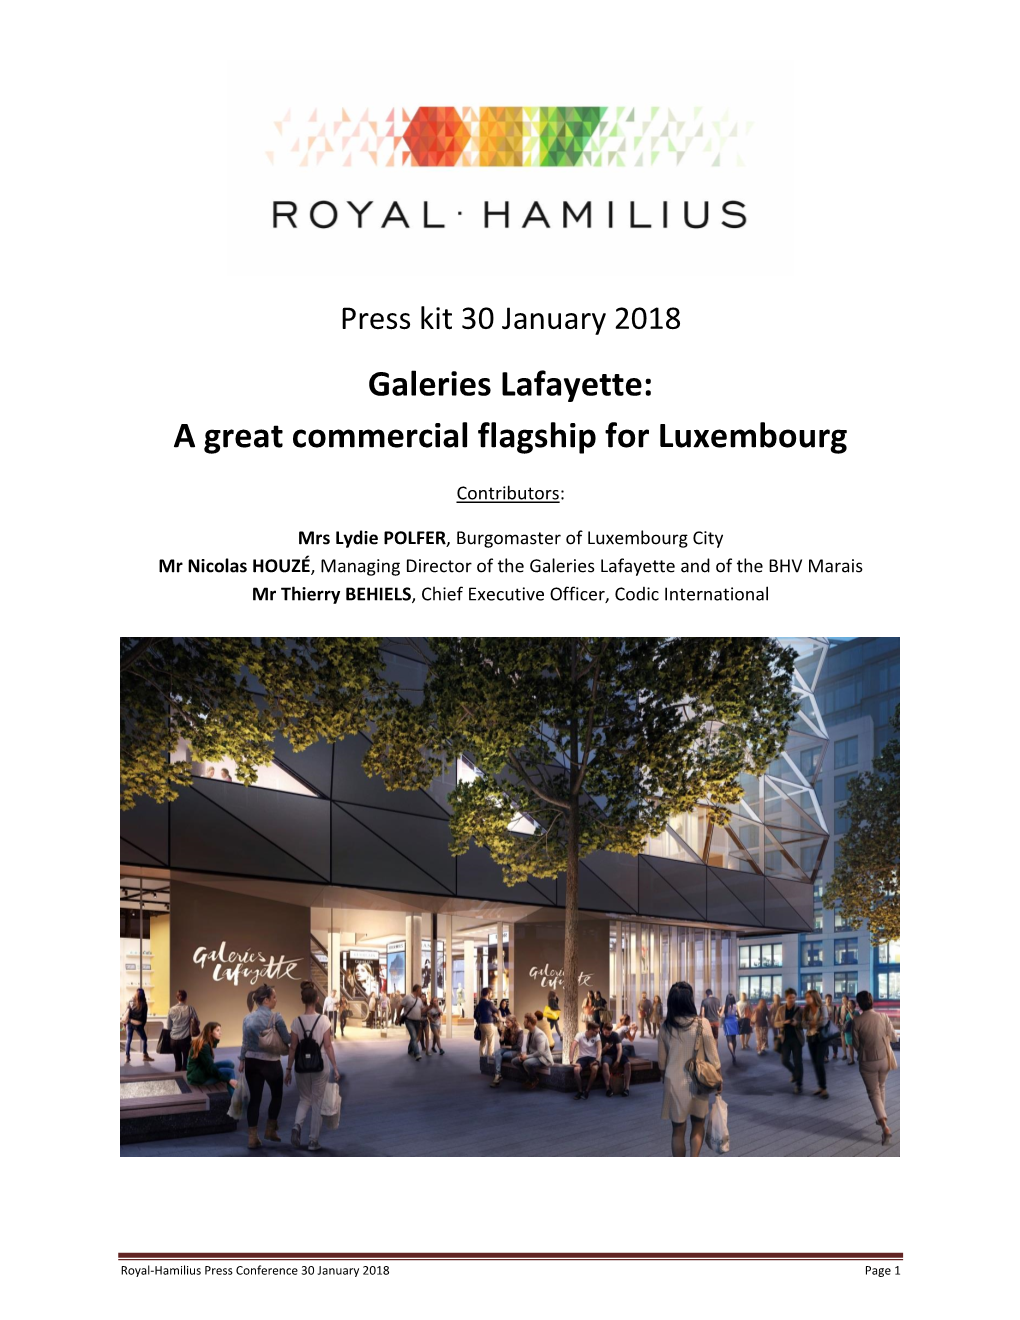 Galeries Lafayette: a Great Commercial Flagship for Luxembourg